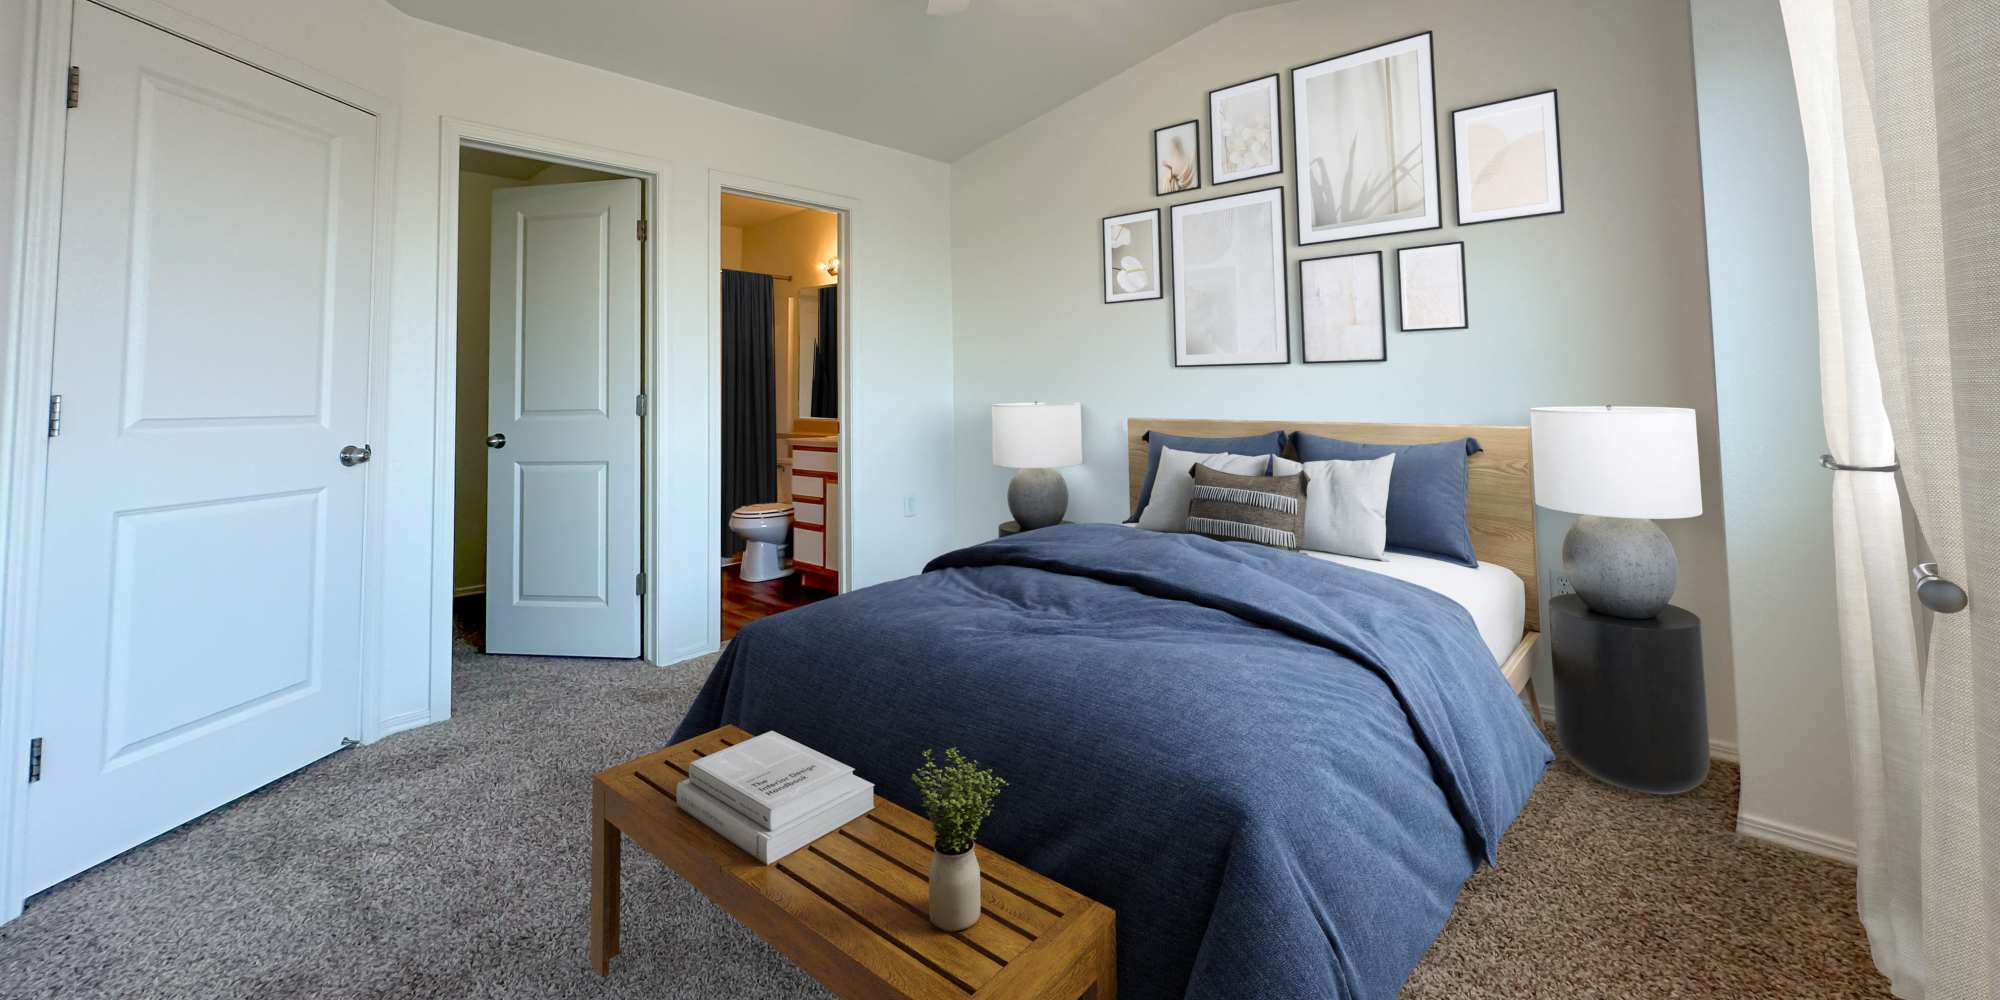 Bedroom with a queen sized bed at Liberty Hill in Draper, Utah